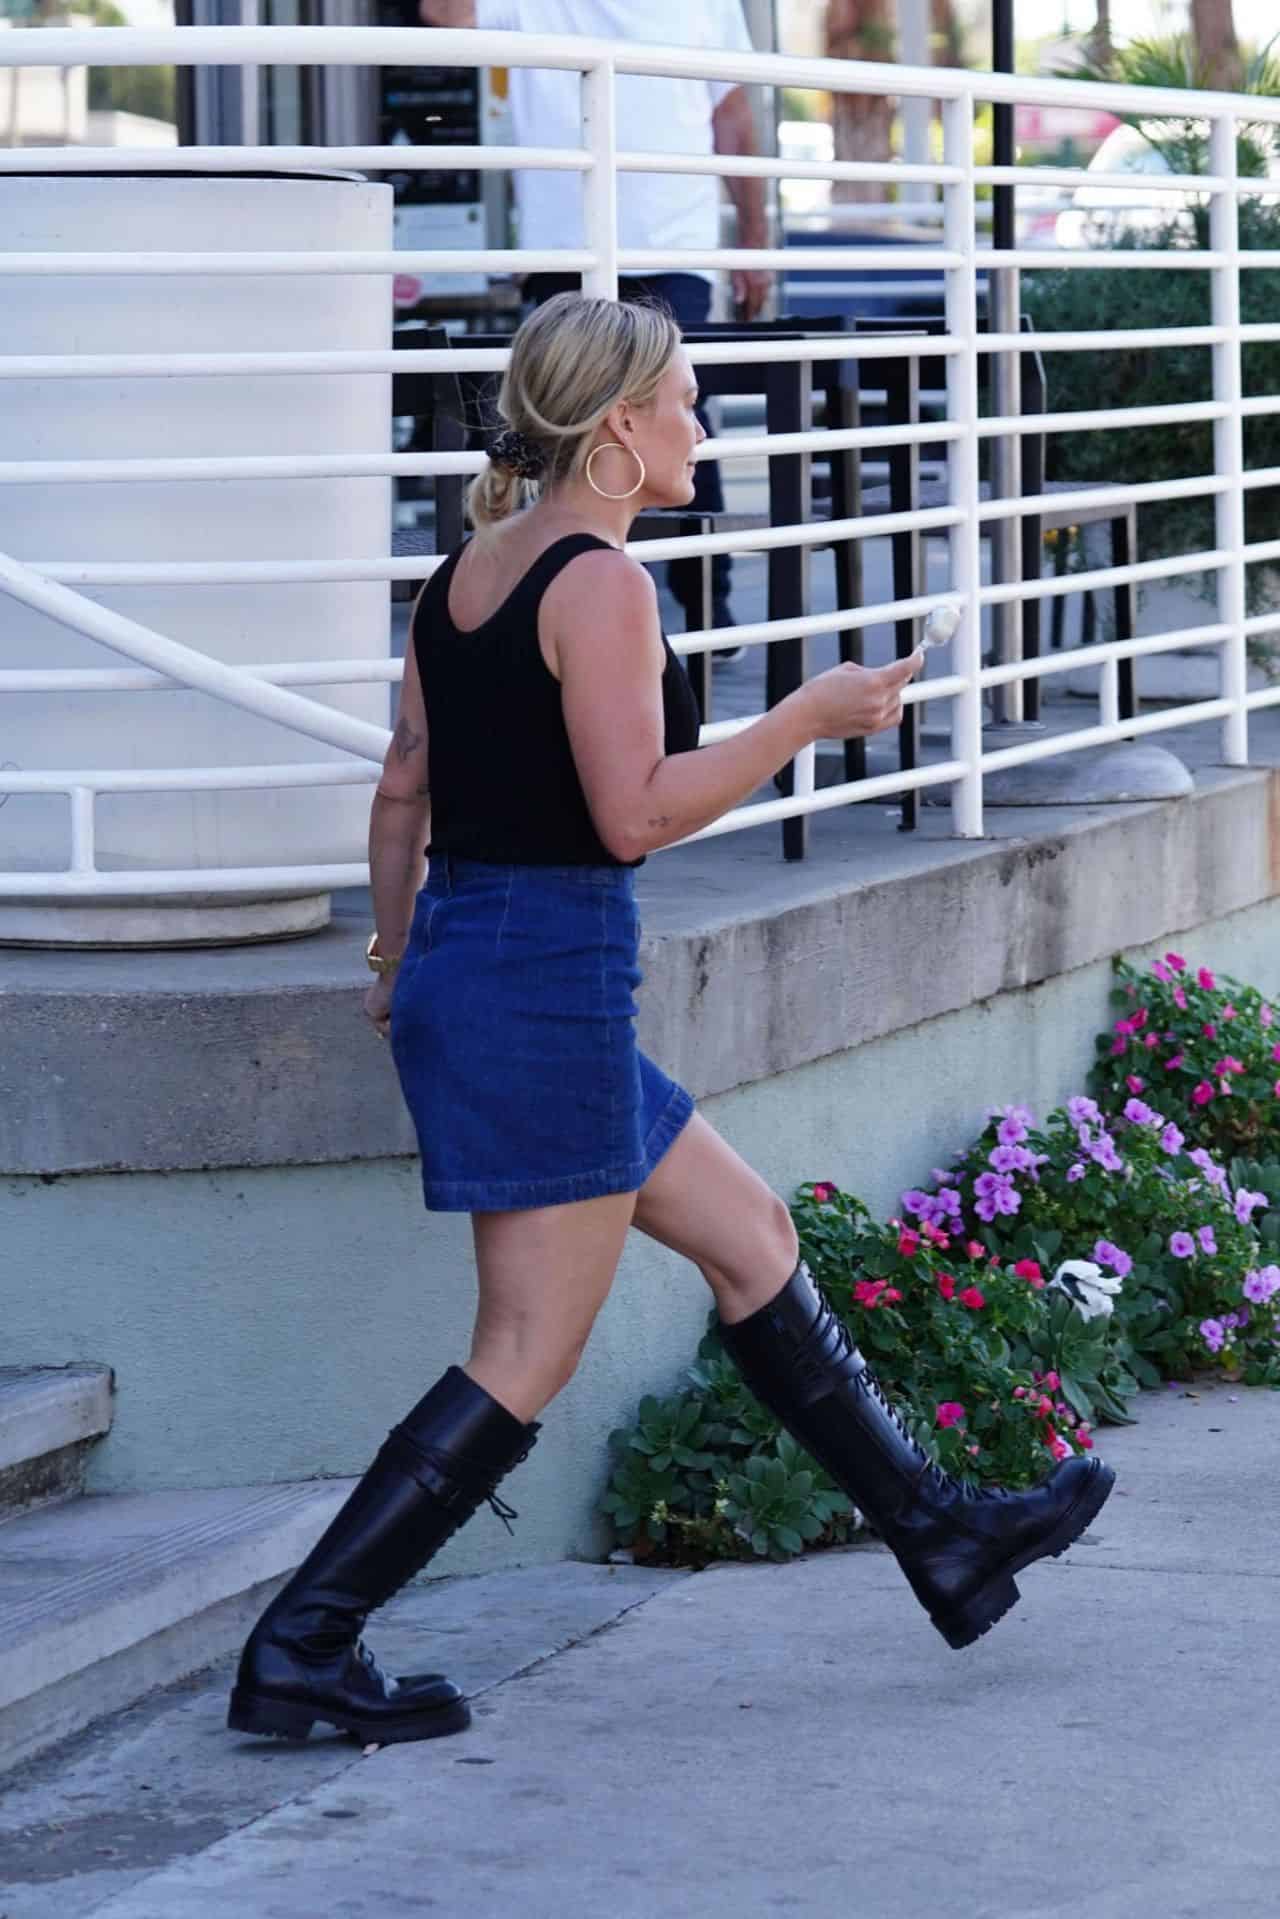 Hilary Duff Nails the Chic Look in a Tank Top and Denim Mini Skirt in LA